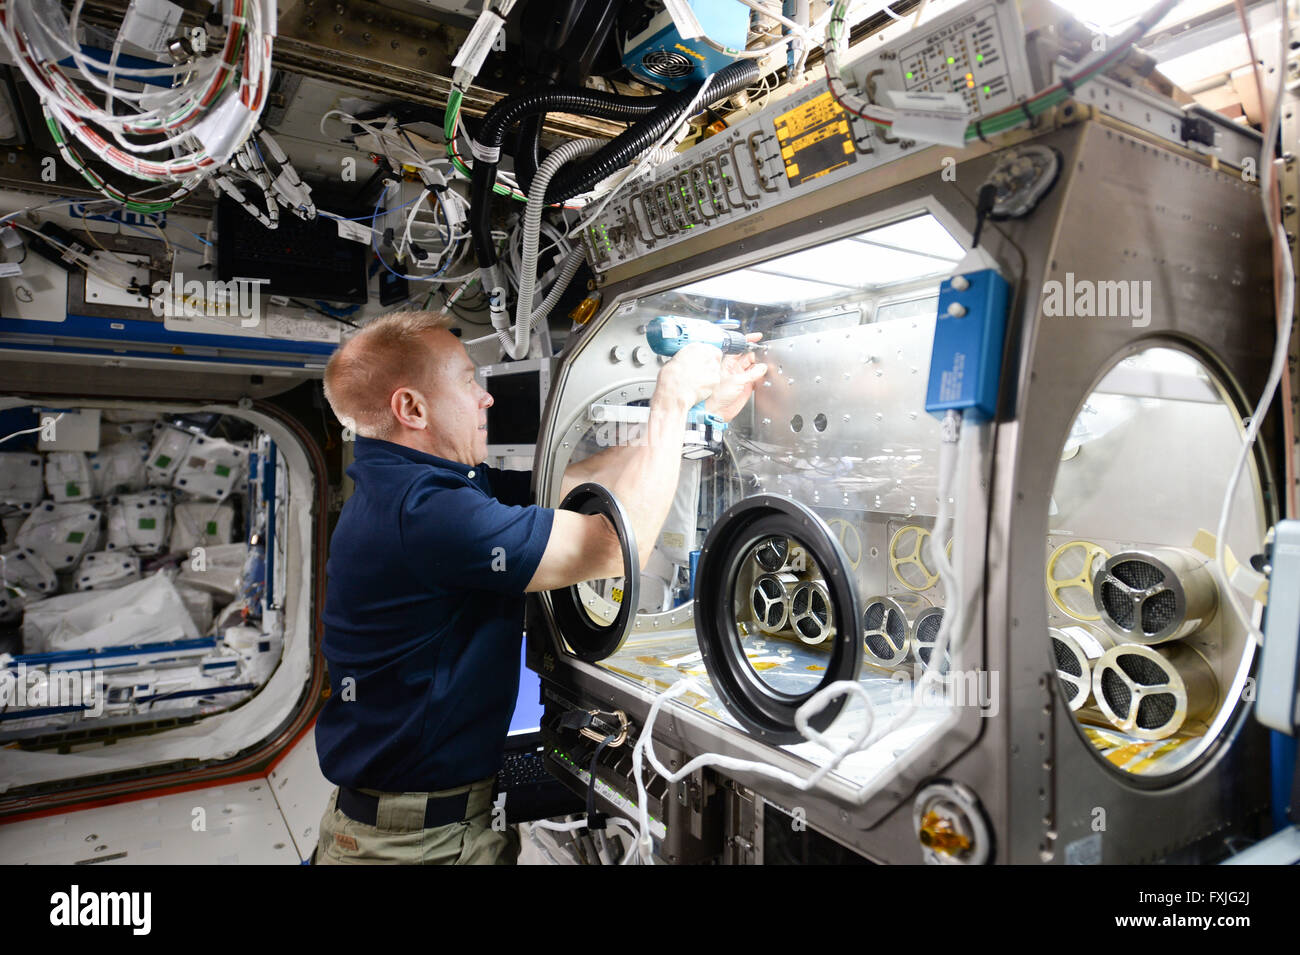 International Space Station Expedition 47 Commander astronaut Tim Kopra configures the Microgravity Science Glovebox for upcoming research inside the Destiny module April 7, 2016 in Earth Orbit. Stock Photo